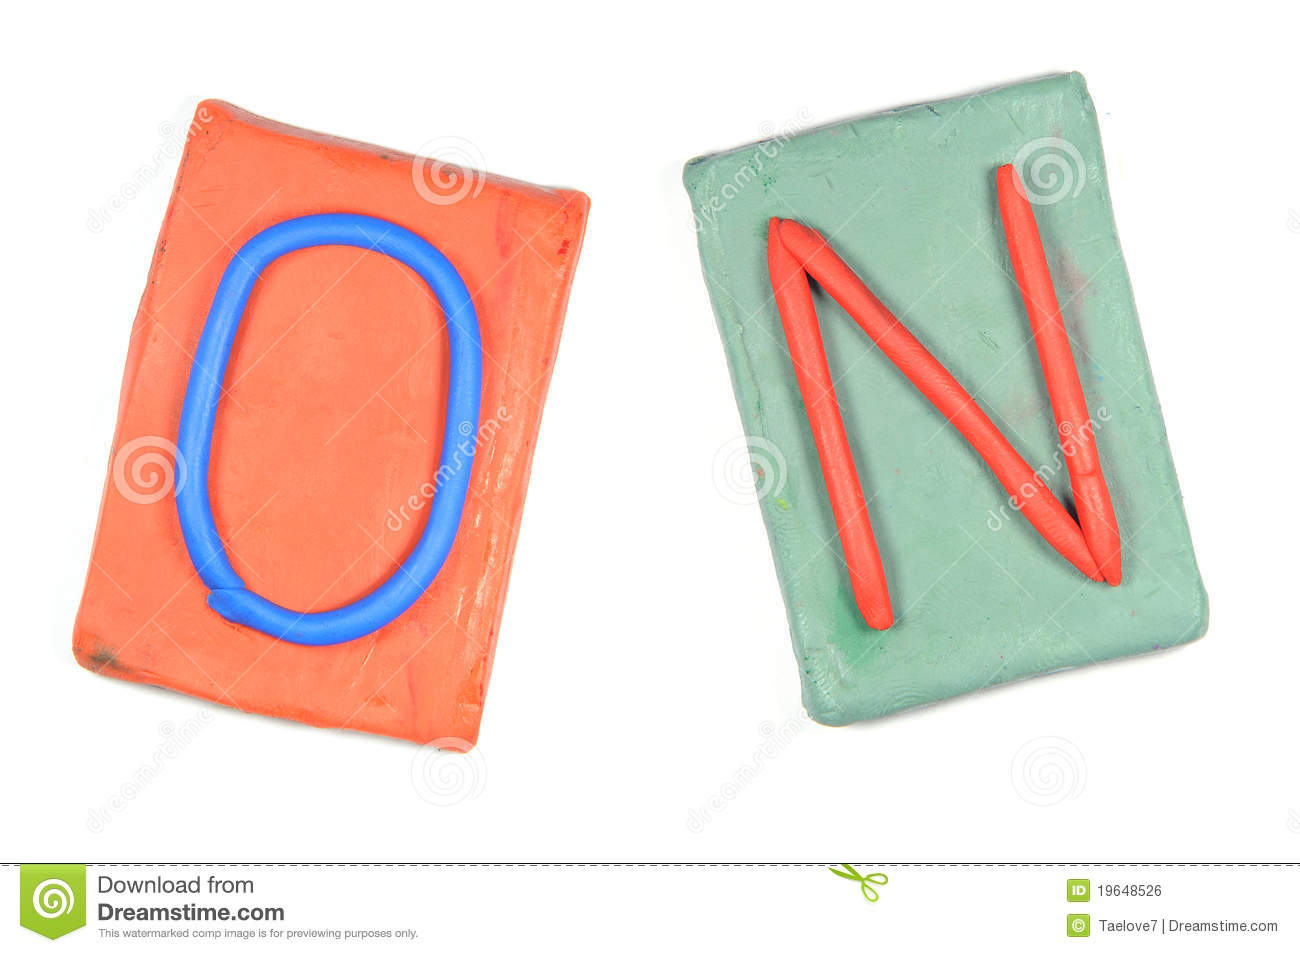 Clay Letters  Words On Royalty Free Stock Image   Image  19648526